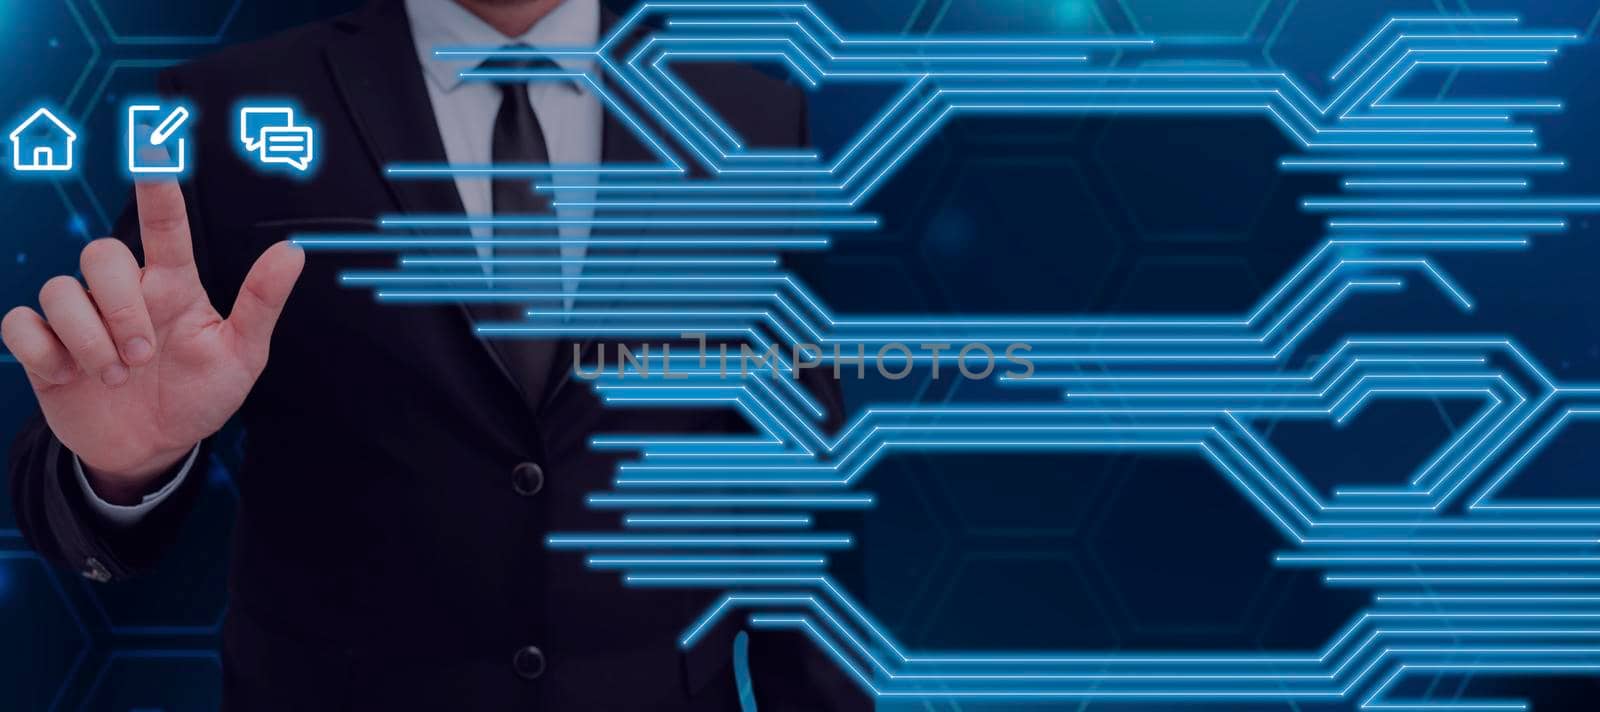 Businessman Pressing On Digital S And Displaying Crucial Information With Glowing Lines In Futuristic Frame. Man In Suit Showing Important Data And Messages. by nialowwa